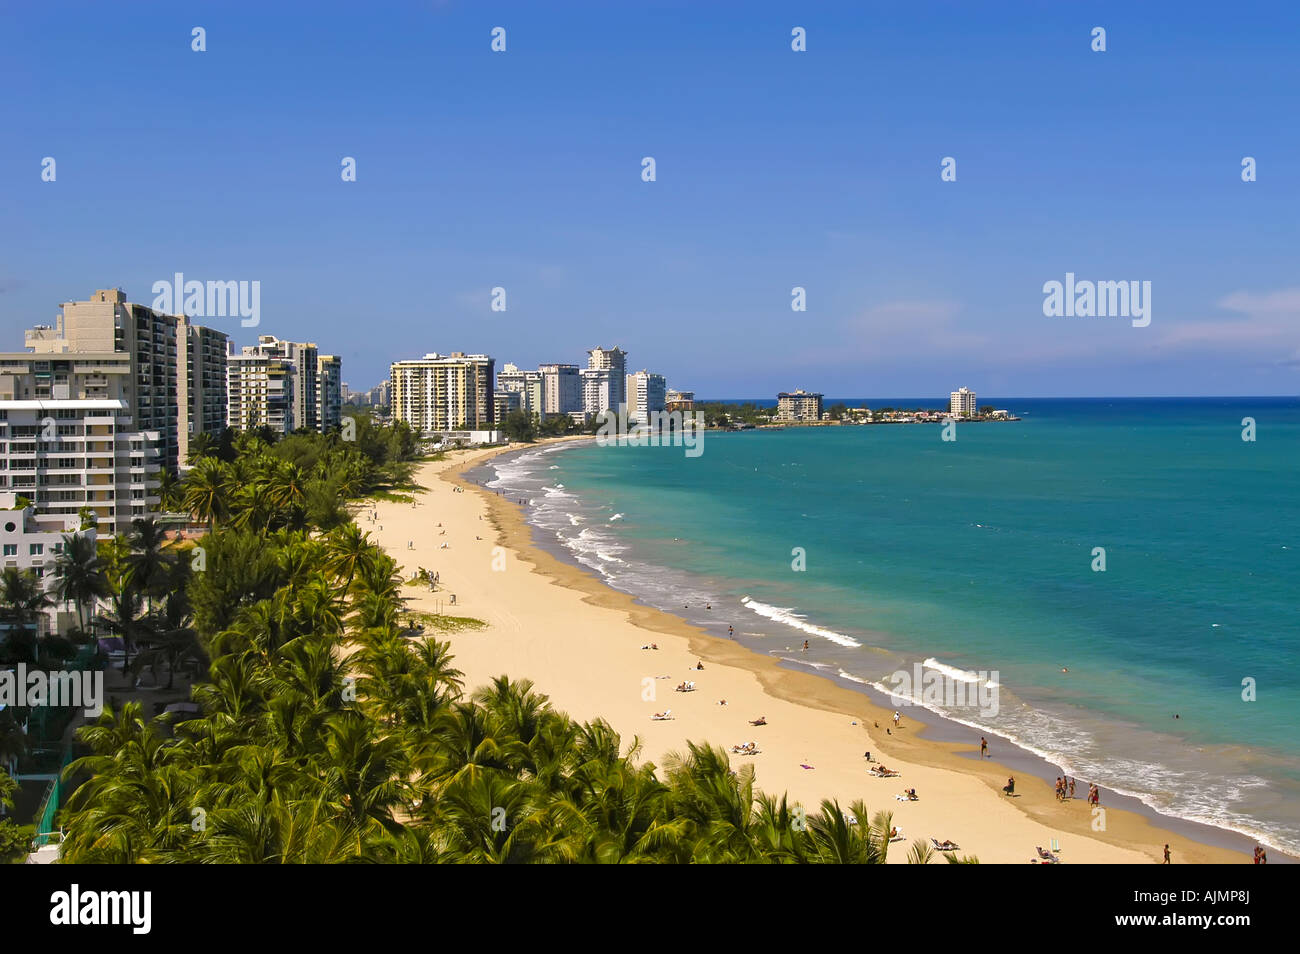 San Juan Puerto Rico Isla Verde beach with sunbathers, blue sky and resort hotels in background, plam trees lining beach, aerial Stock Photo